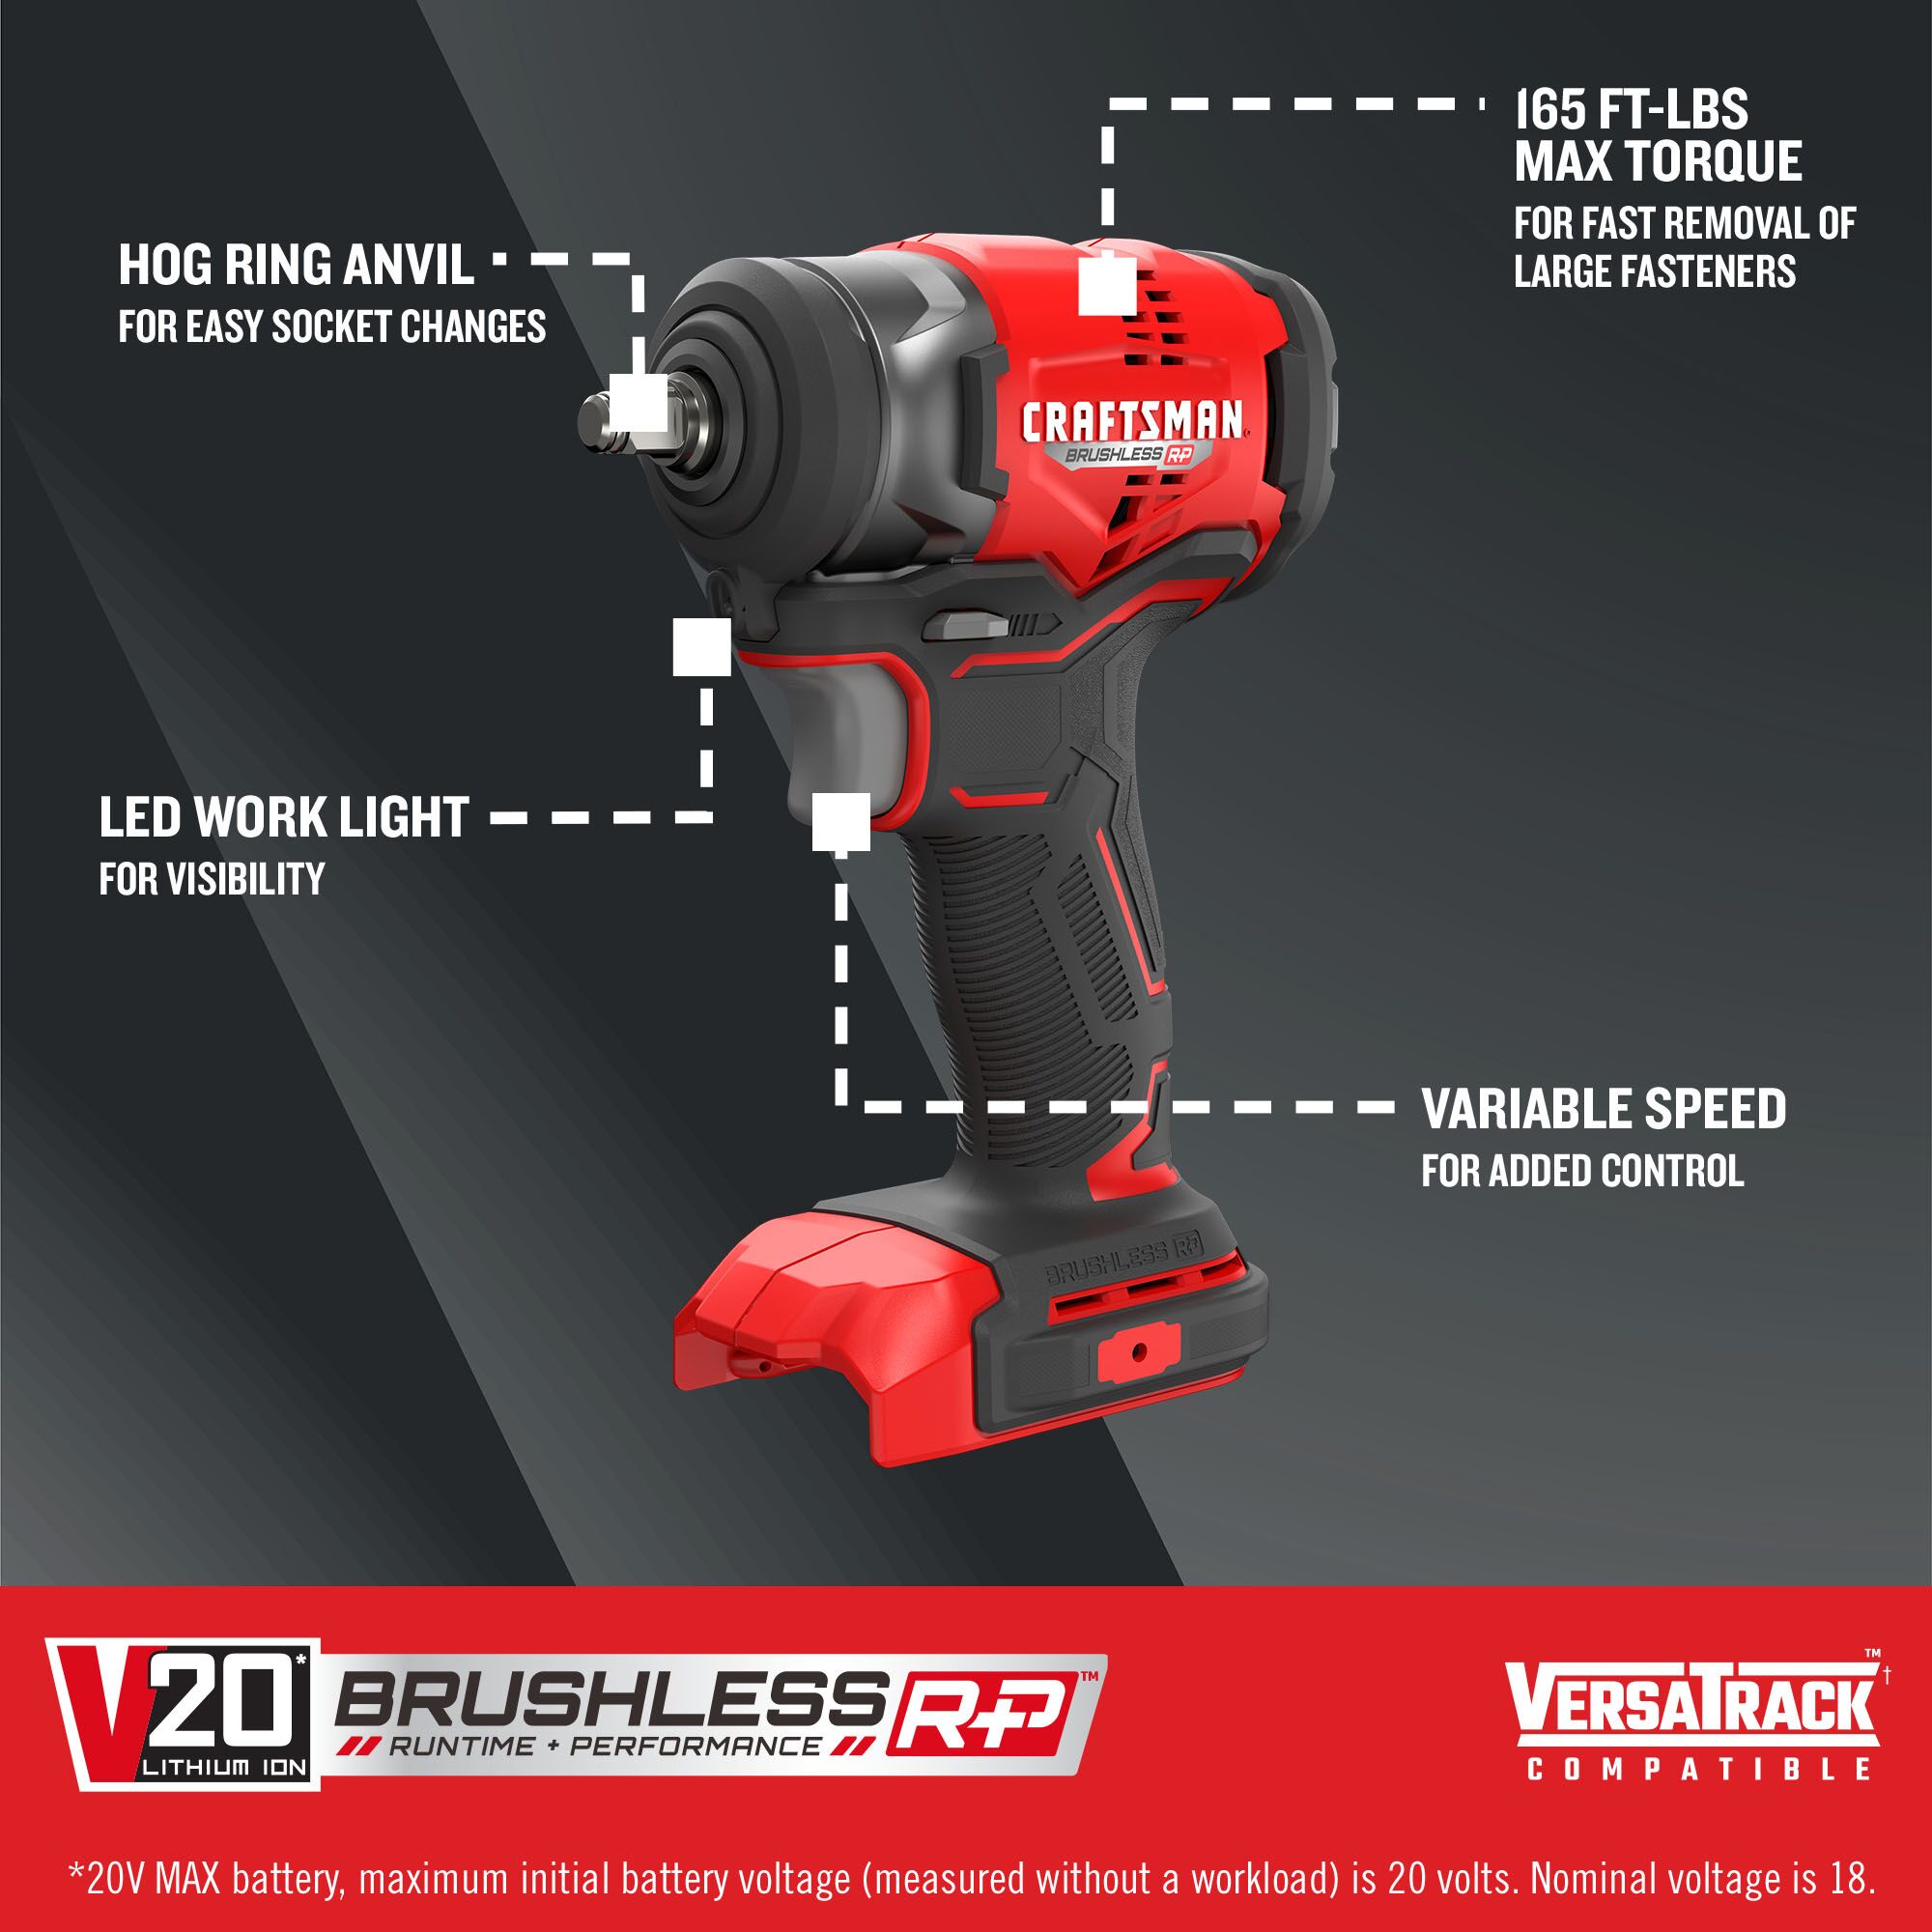 V20 BRUSHLESS RP 3/8 inch Impact Wrench (Tool Only) on dark background